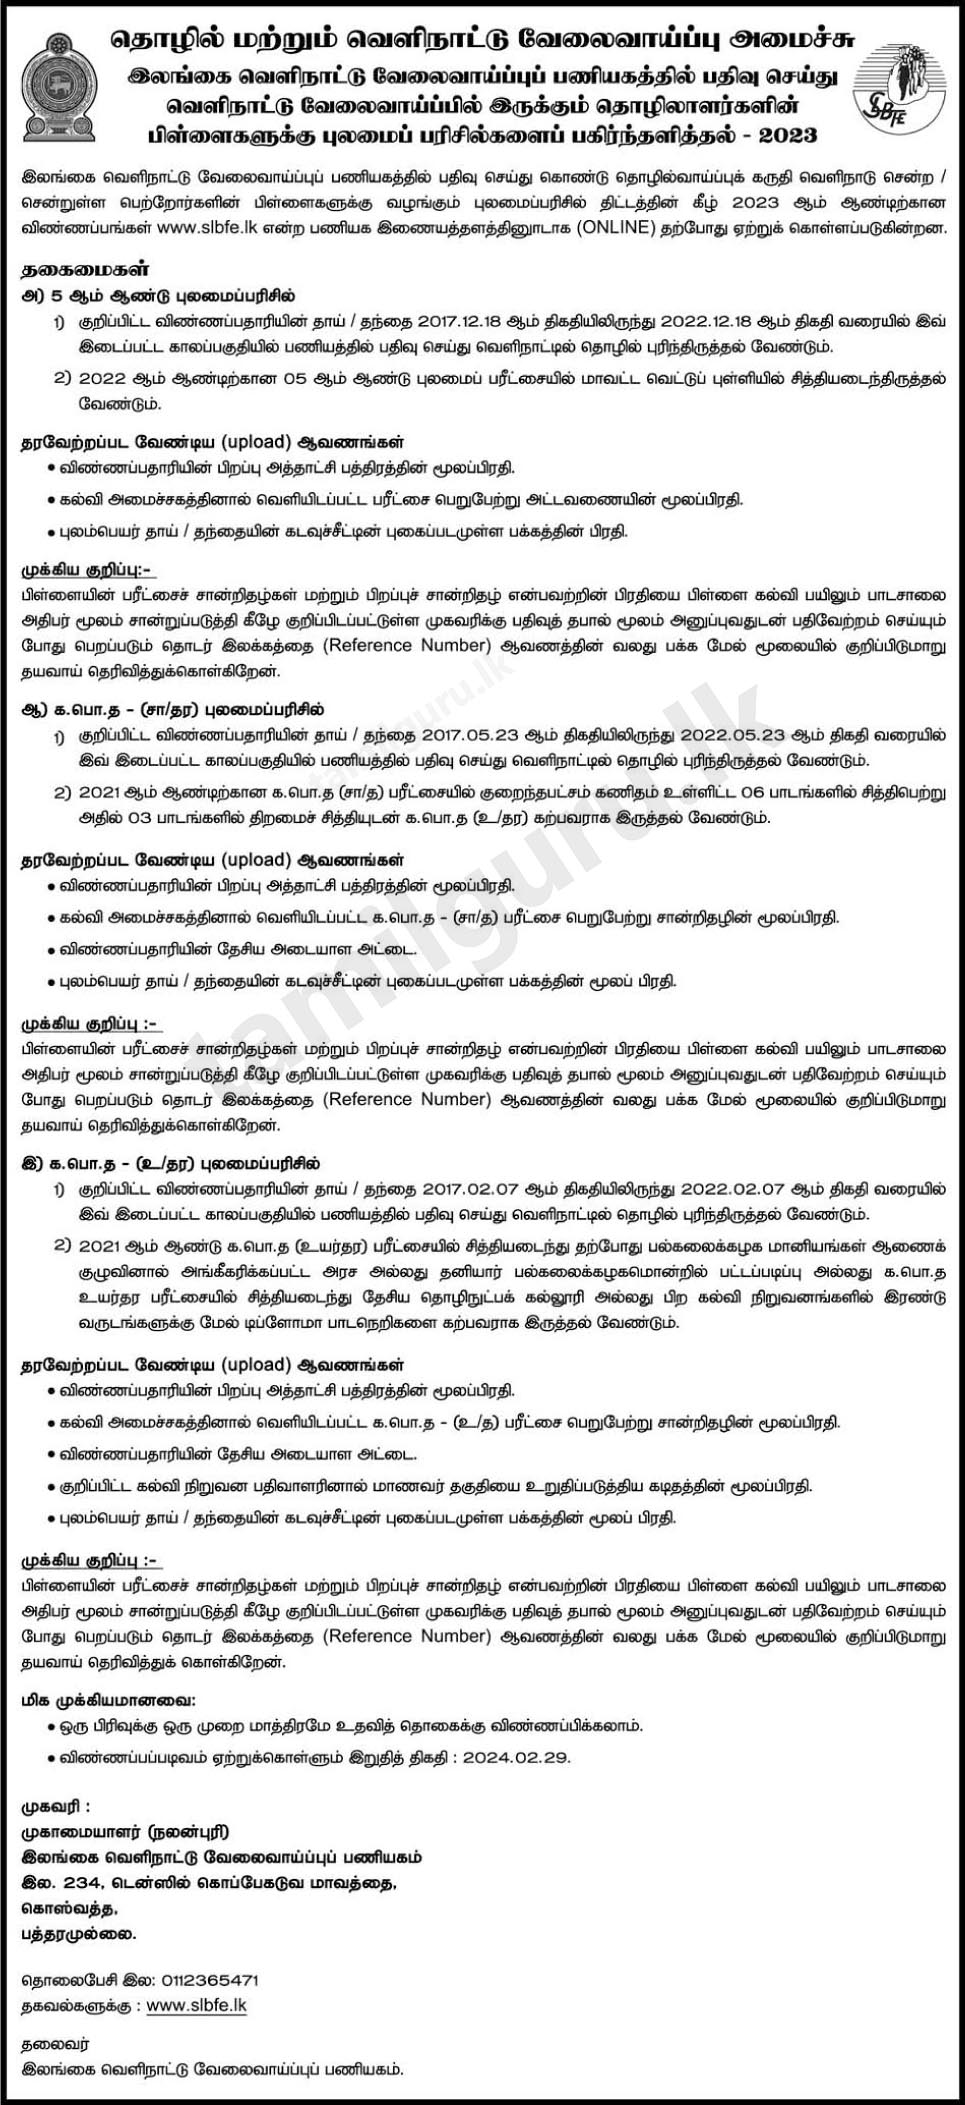 SLBFE Scholarships Application for Migrant Workers' Children 2023 (2024)